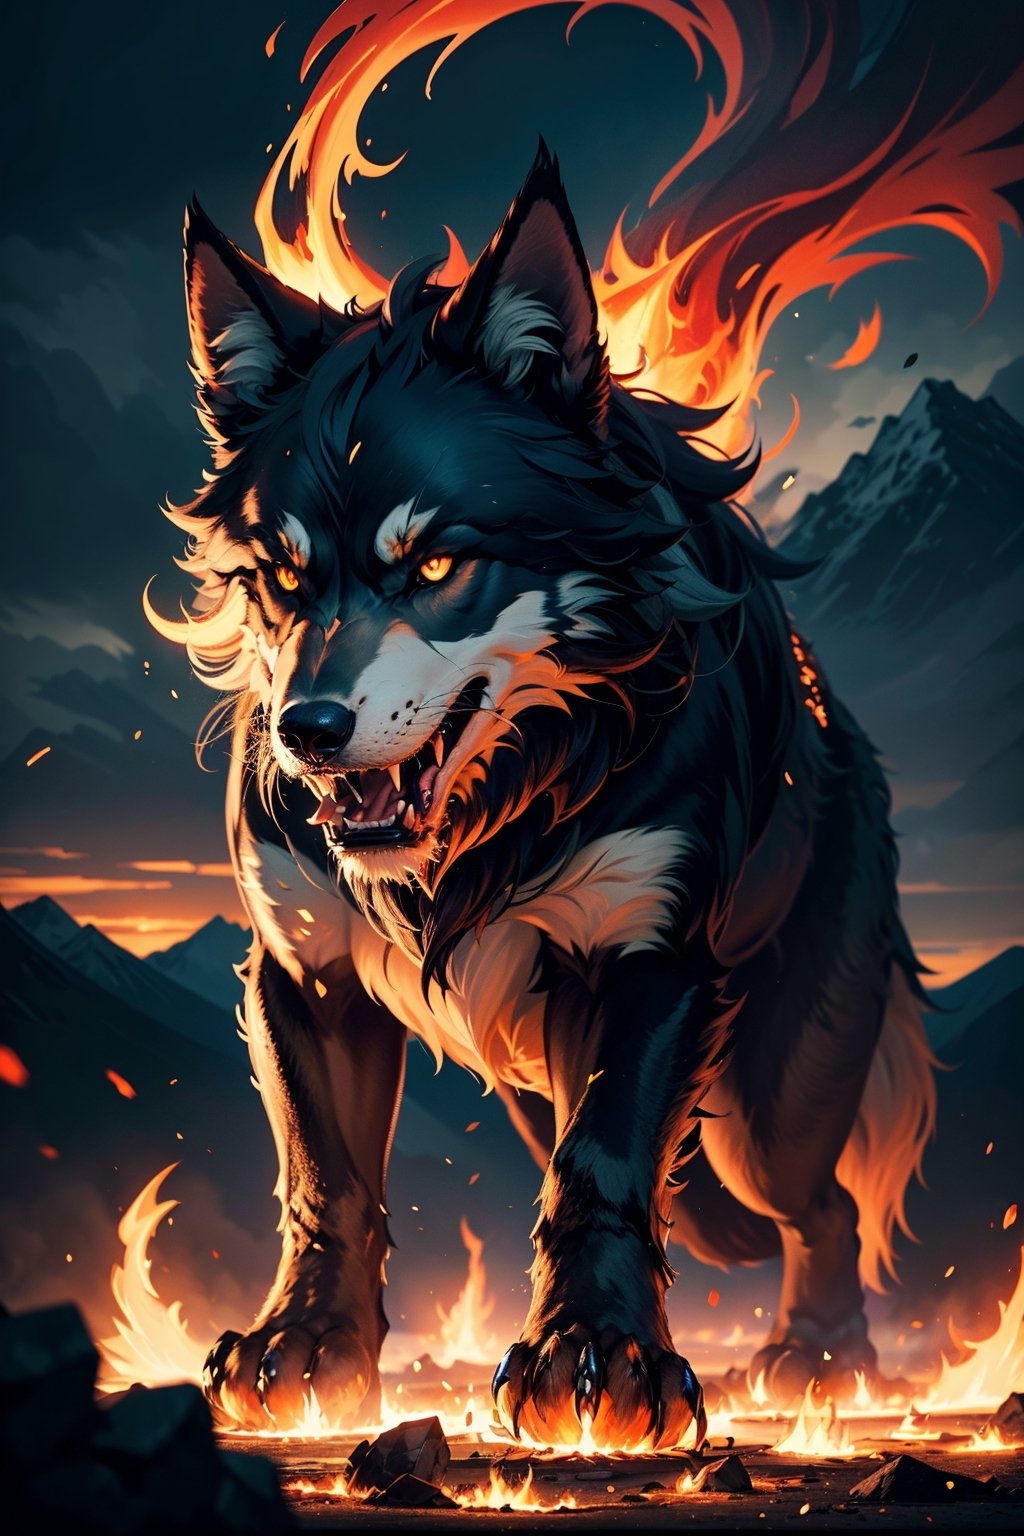 (best quality, highres:1.2, ultra-detailed, photorealistic:1.37), giant wolf Fenrir, fire, mountains, protruding, broken shackles, chains hanging, red eyes, angry, realistic lighting, dark atmosphere, eerie shadows, menacing presence, glowing embers, powerful stance, epic landscape, smoke billowing, intense heat, growling, fierce expression, wild fur, towering silhouette, raging flames, ethereal glow, foreboding, untamed power